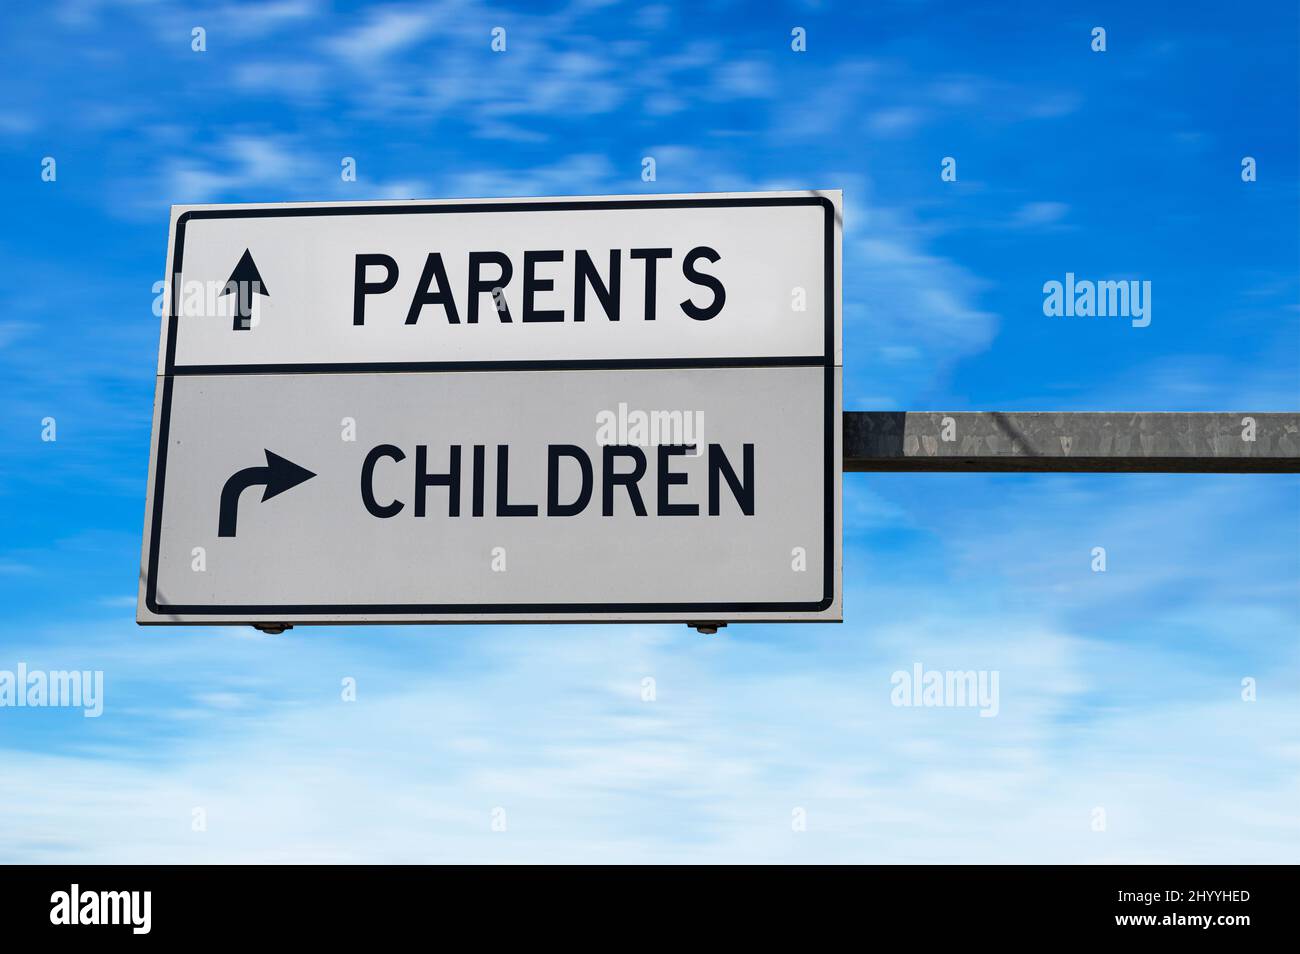 Road sign with words parents and children. White two street signs with arrow on metal pole on blue sky background. Stock Photo